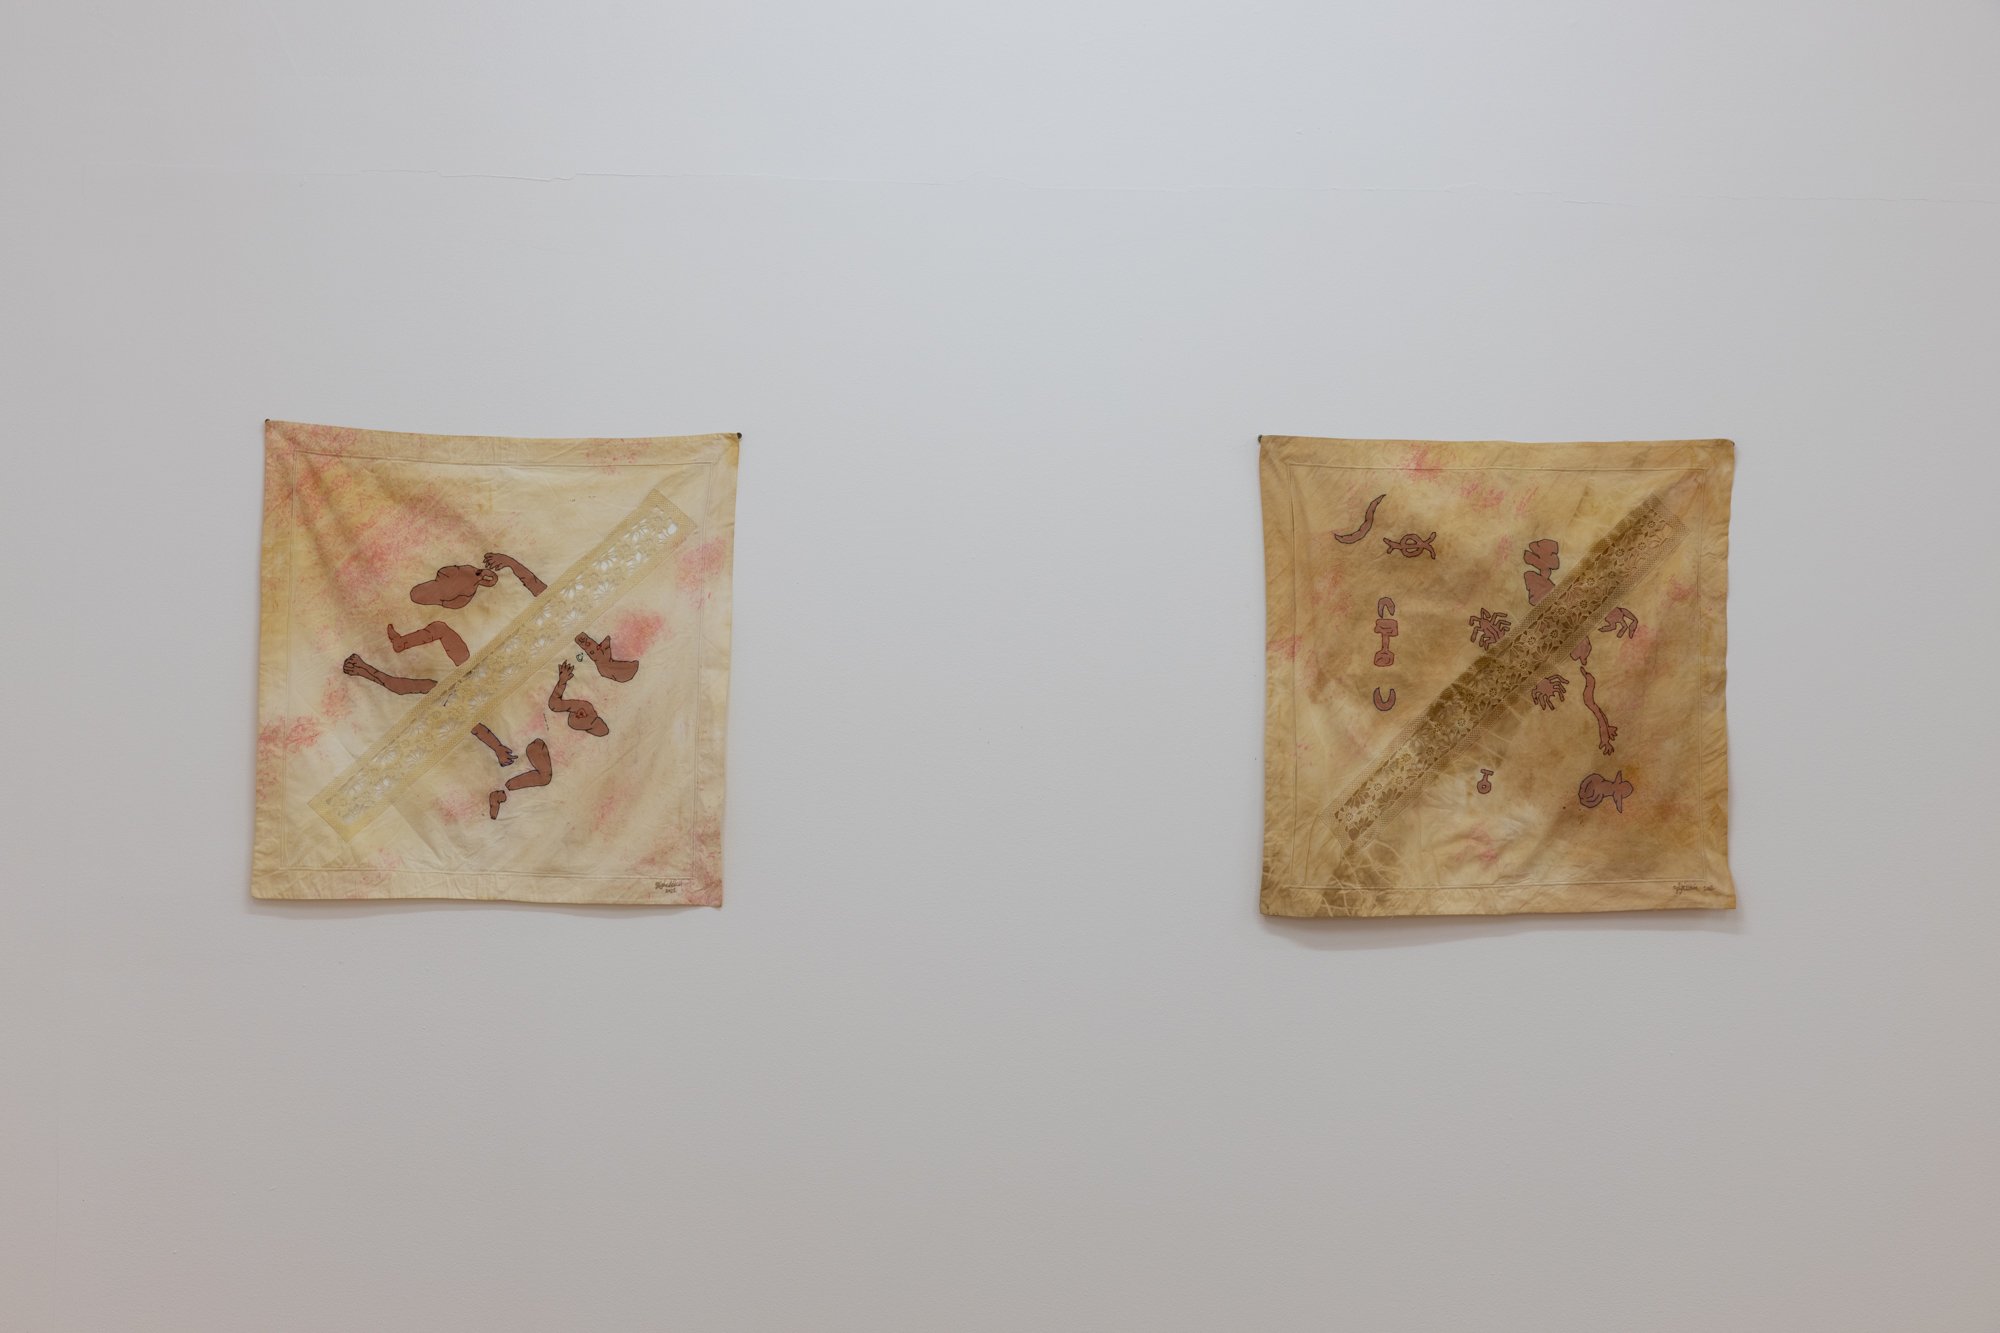  Quiet Abrasion, 2022, Five pieces of pillowcase stitching and painting on natural dyed pillowcases, 57 x 57cm.  